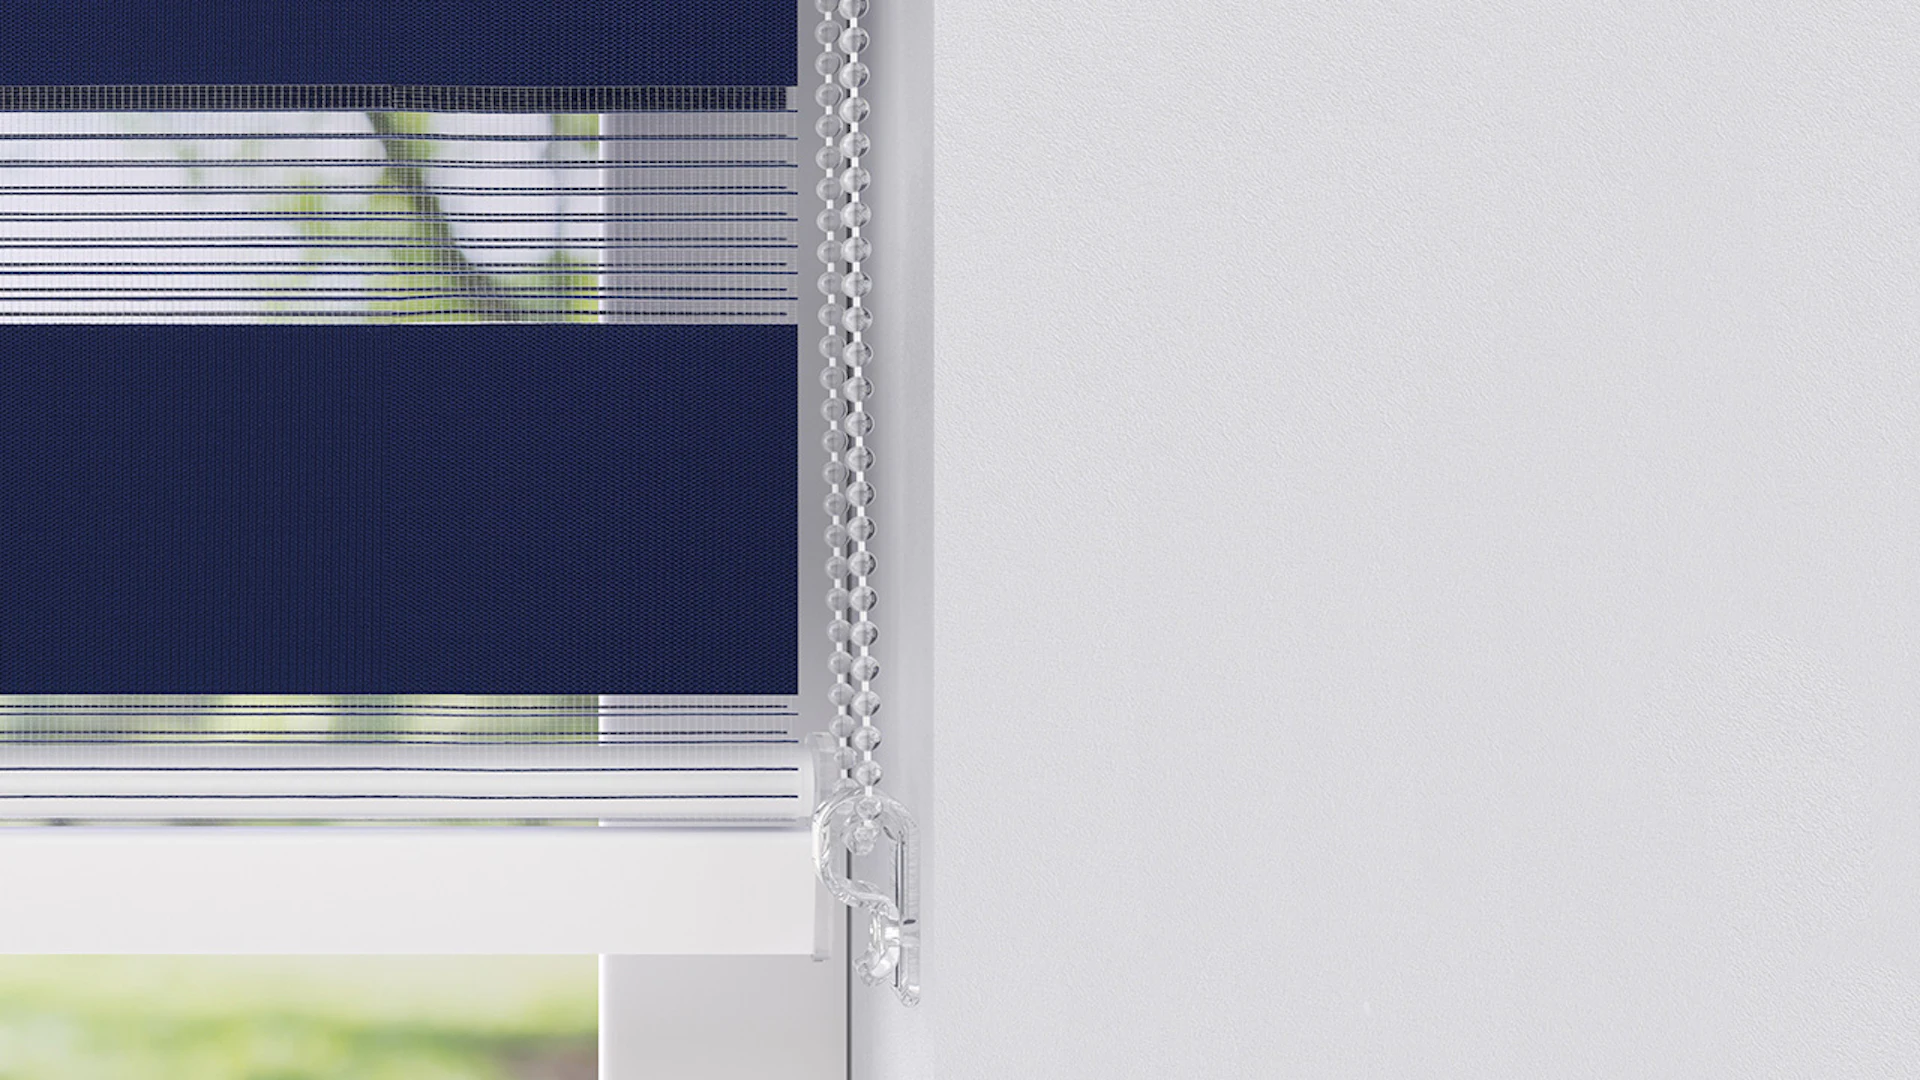 planeo double roller blind 28mm TL head profile - Blue